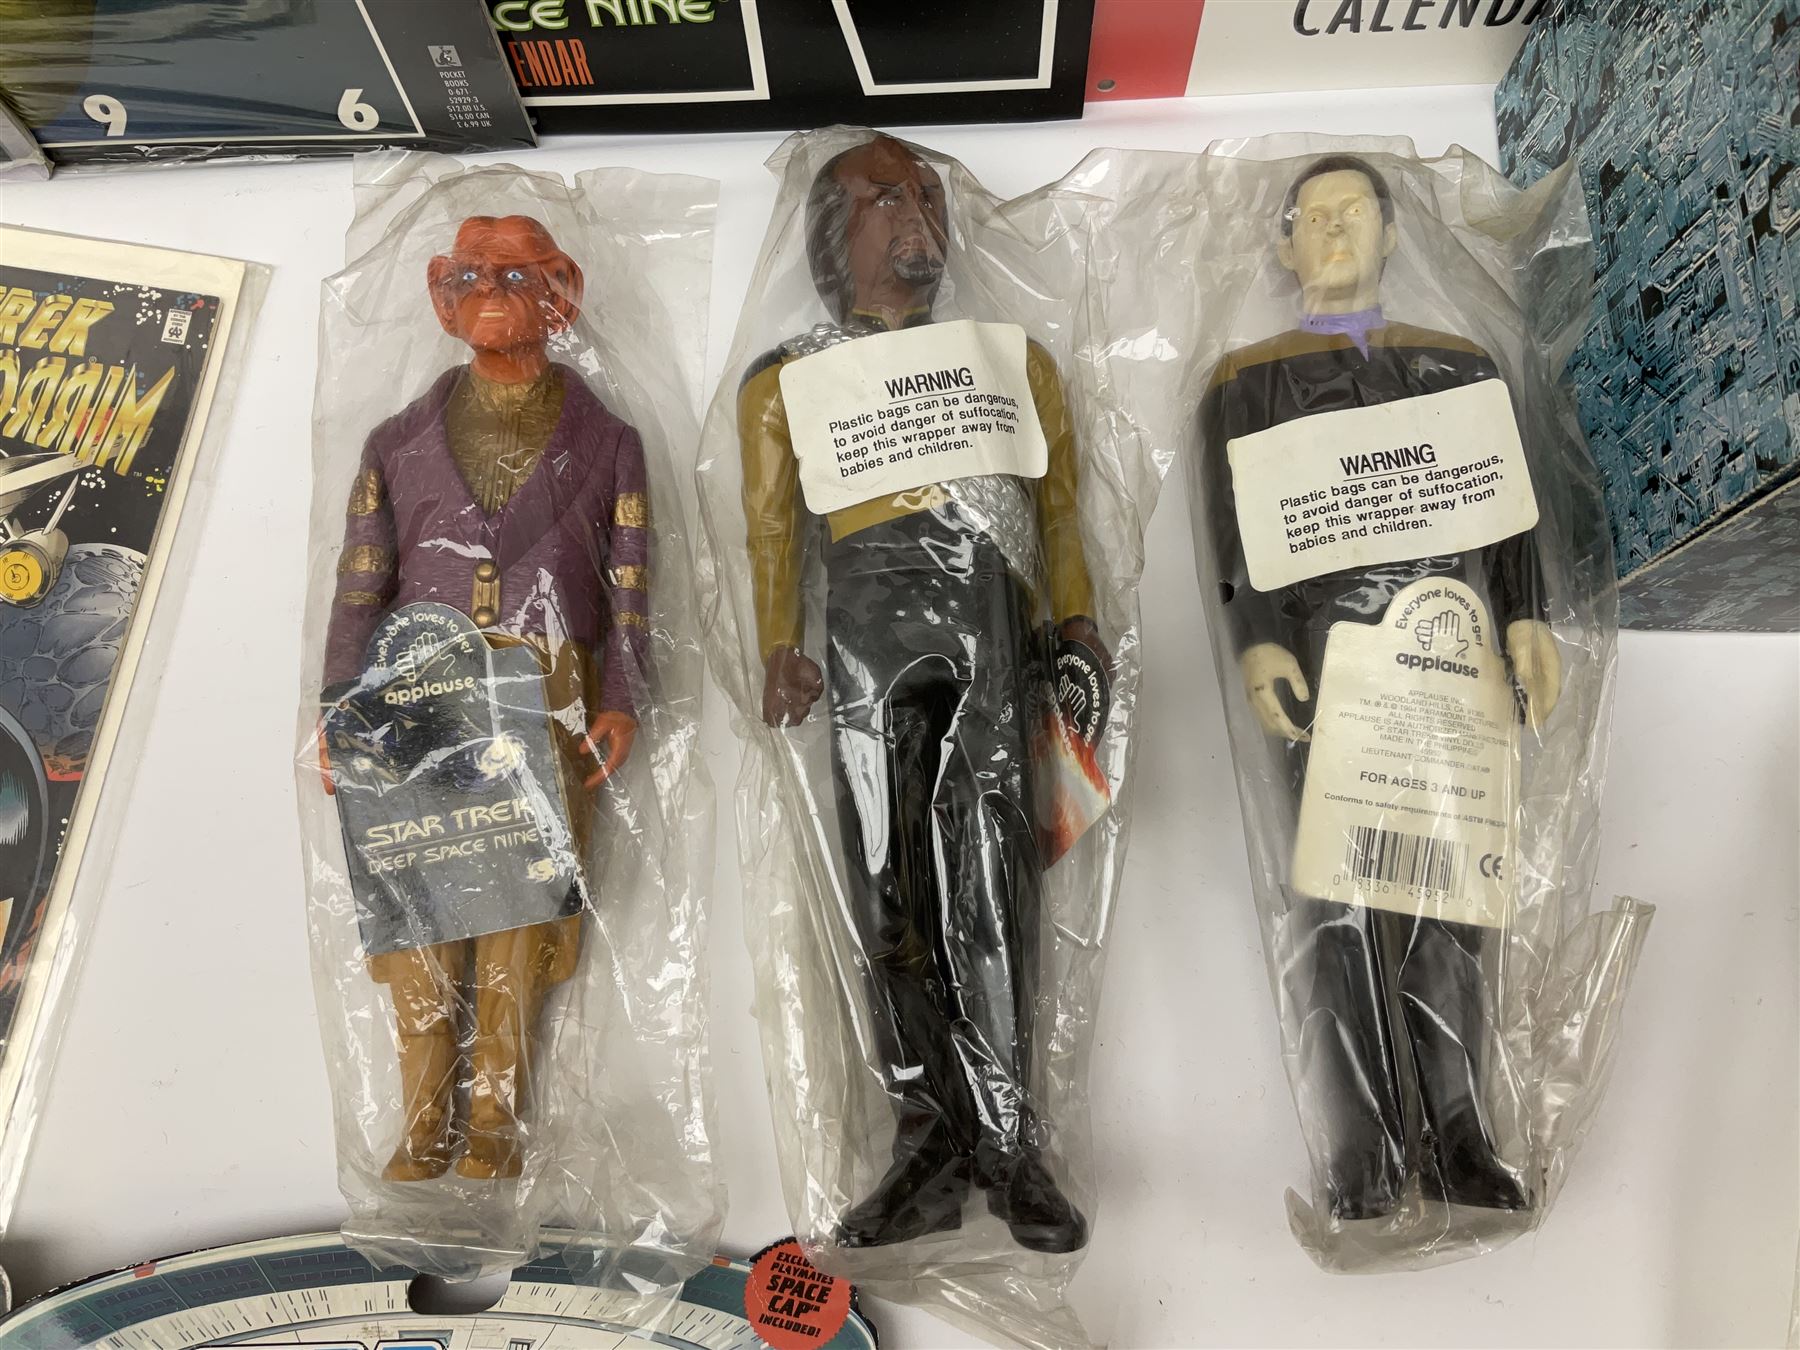 Quantity of Star Trek memorabilia and promotional merchandise including action figures - Image 3 of 7